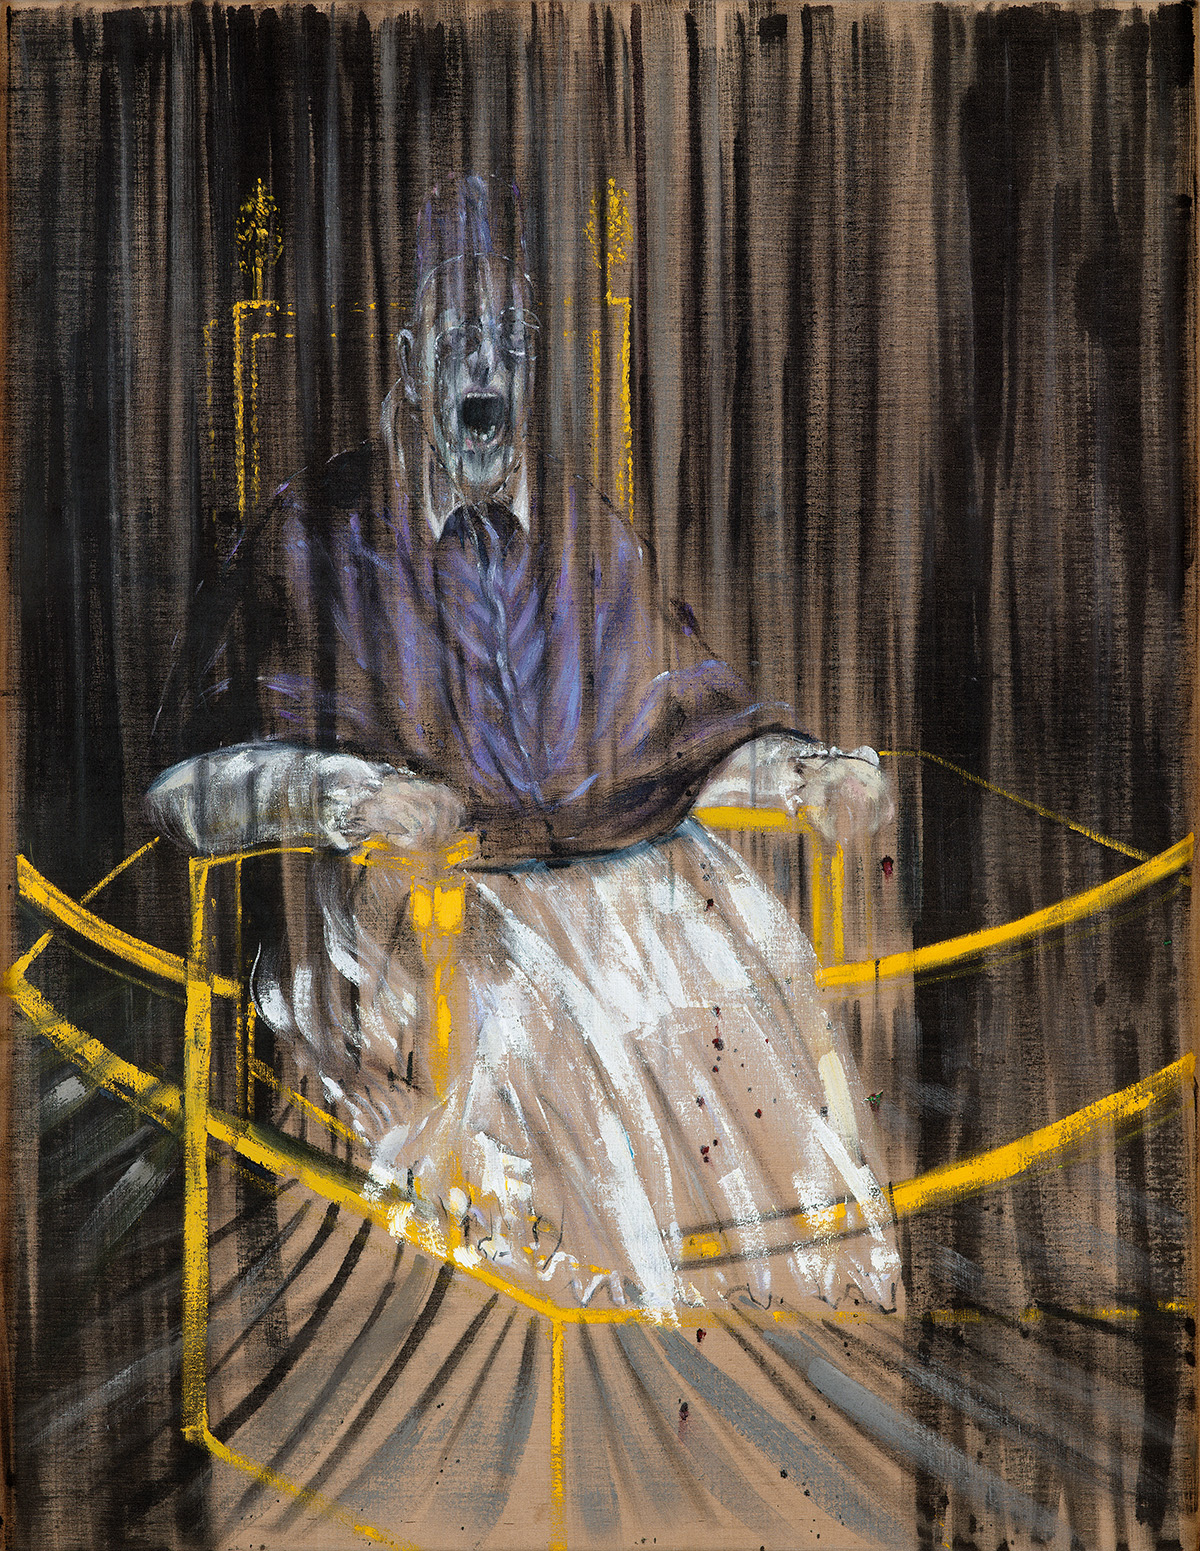 Francis Bacon, Study After Velázquez’s Portrait of Pope Innocent X, 1953. Oil on canvas. CR number 53-02. © The Estate of Francis Bacon / DACS London 2020. All rights reserved.